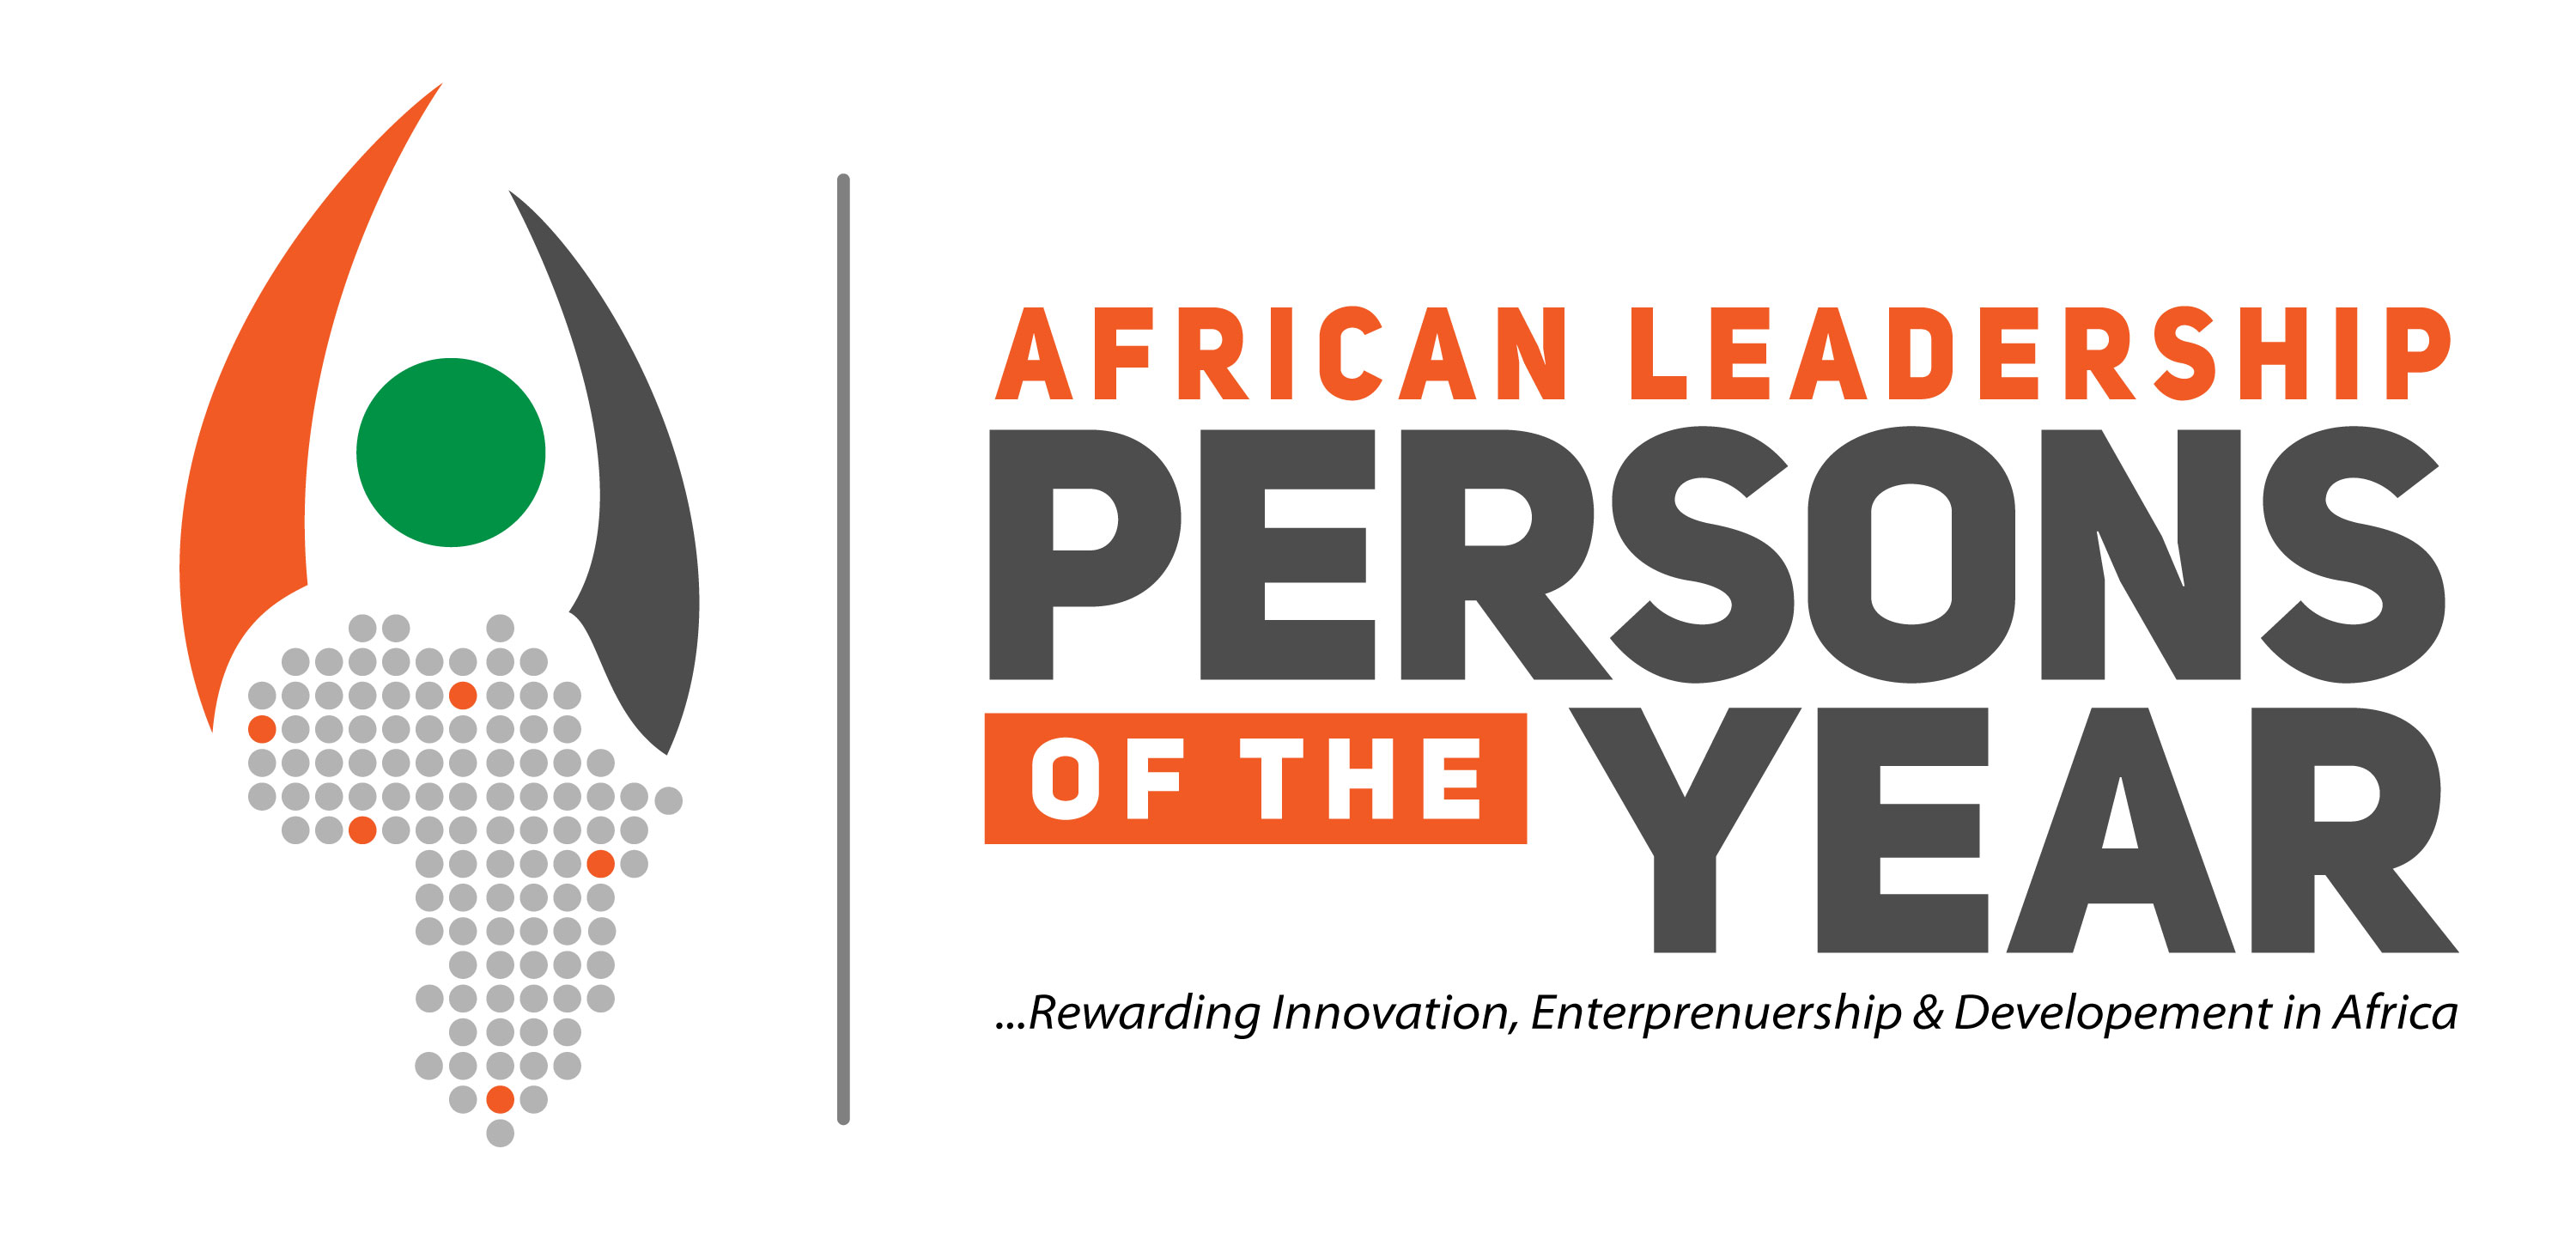 Nomination Opens for African Leadership Magazine Persons of the Year 2020